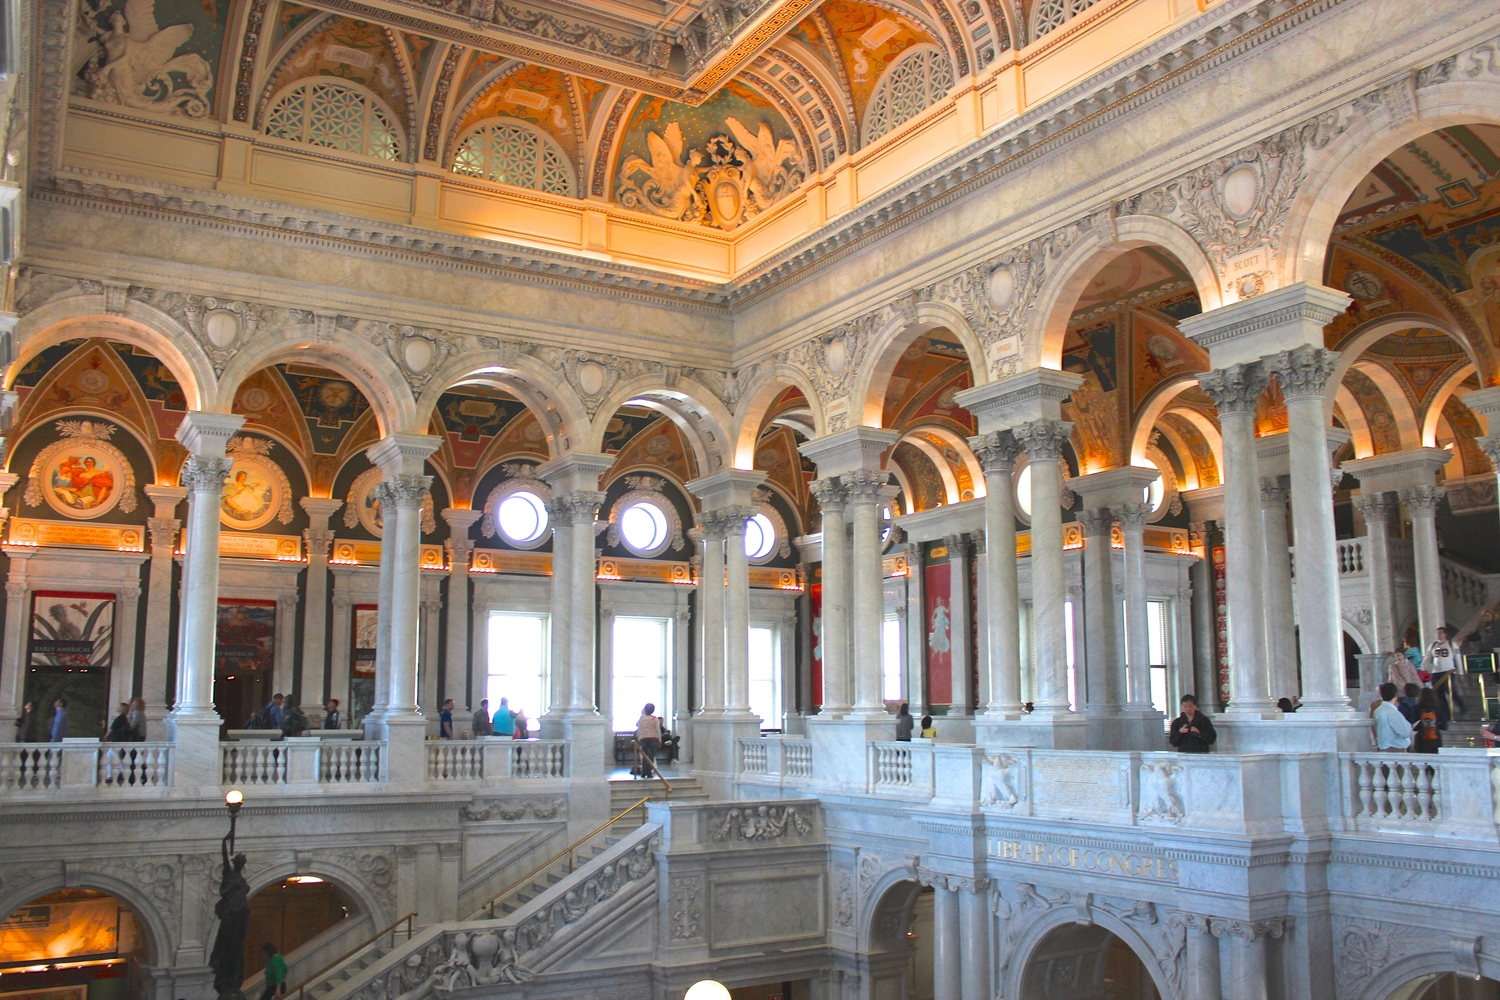 The breathtaking interior of the Library of Congress